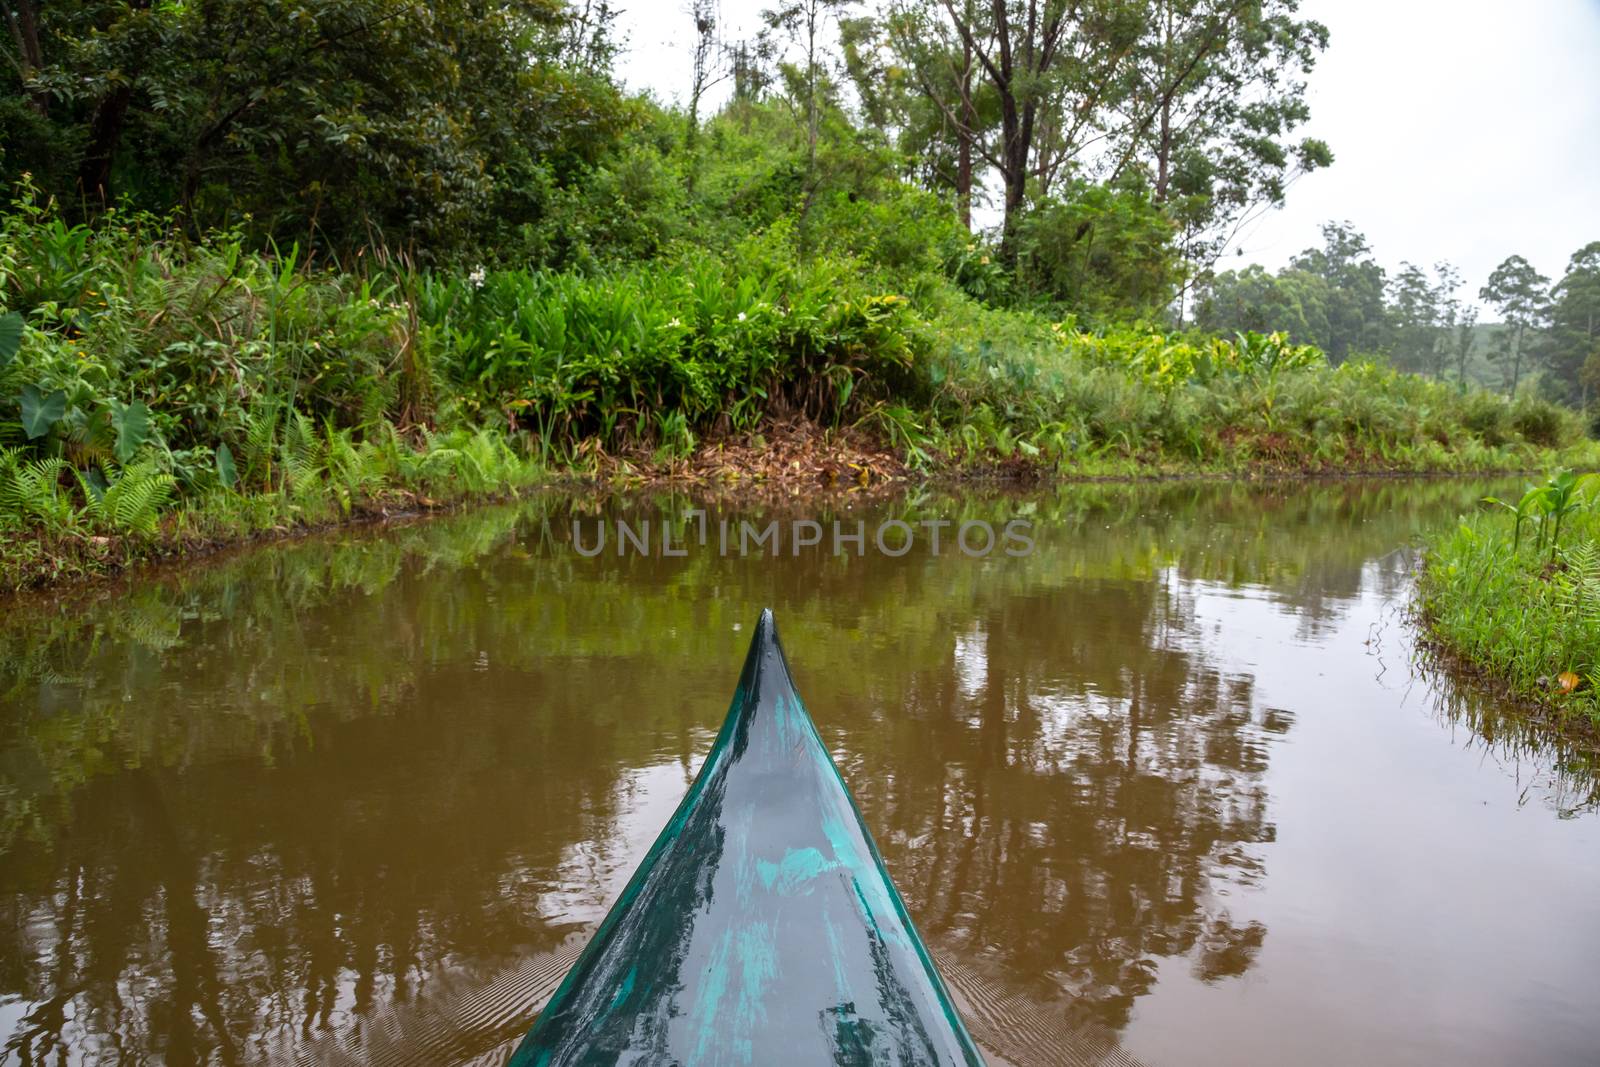 The boat trip on a river through the middle of the jungle